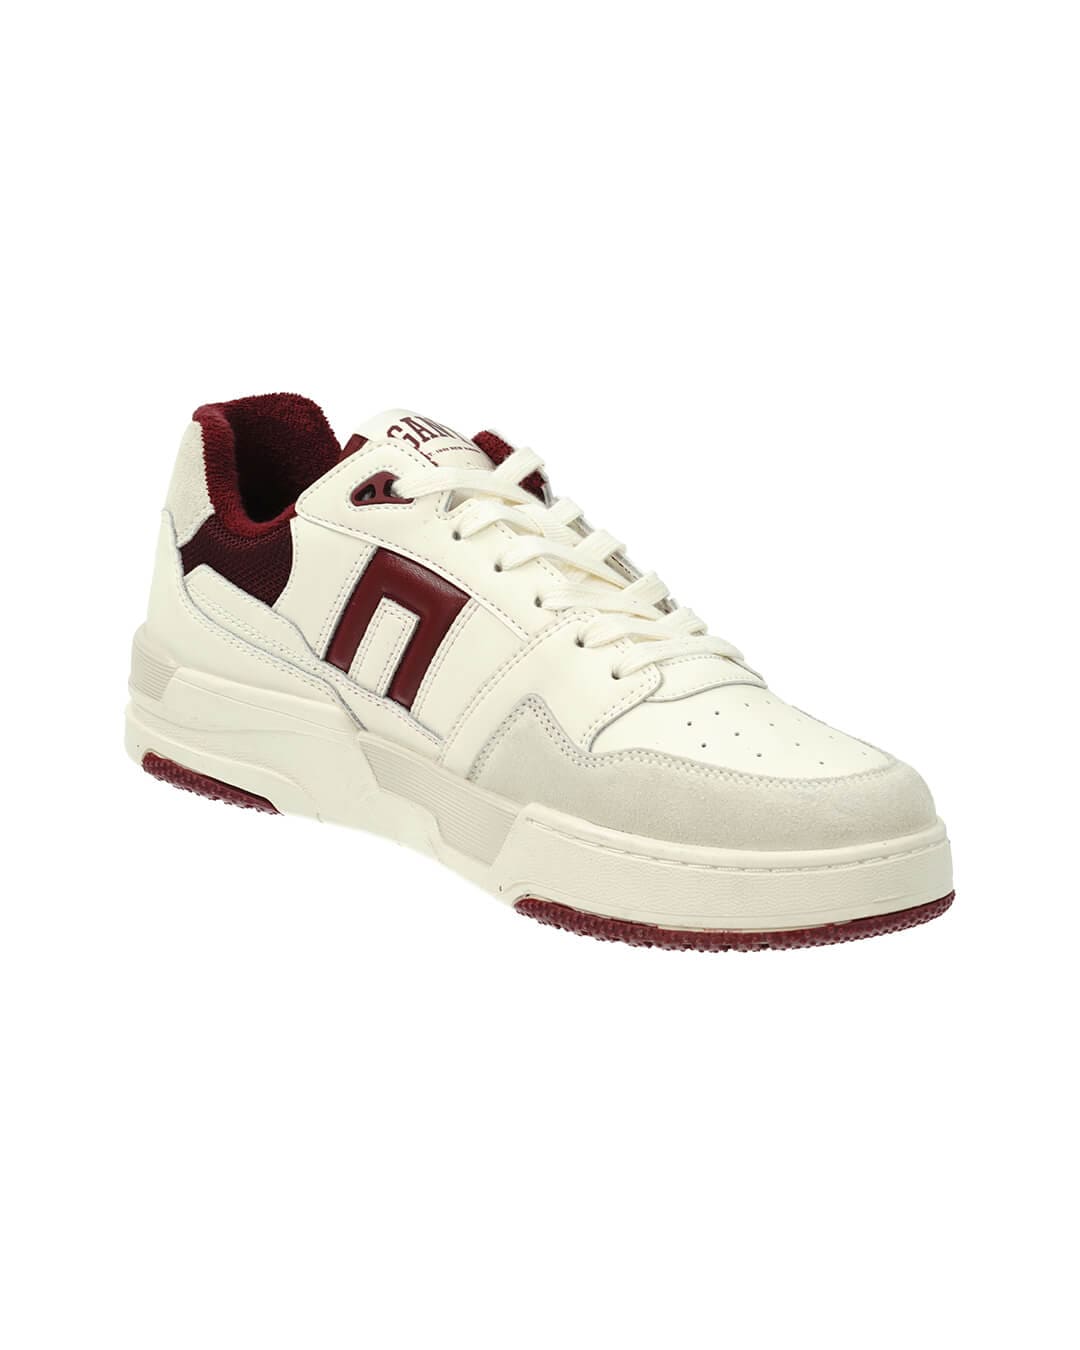 Gant Shoes Gant Off White And Red Brookpal Sneakers